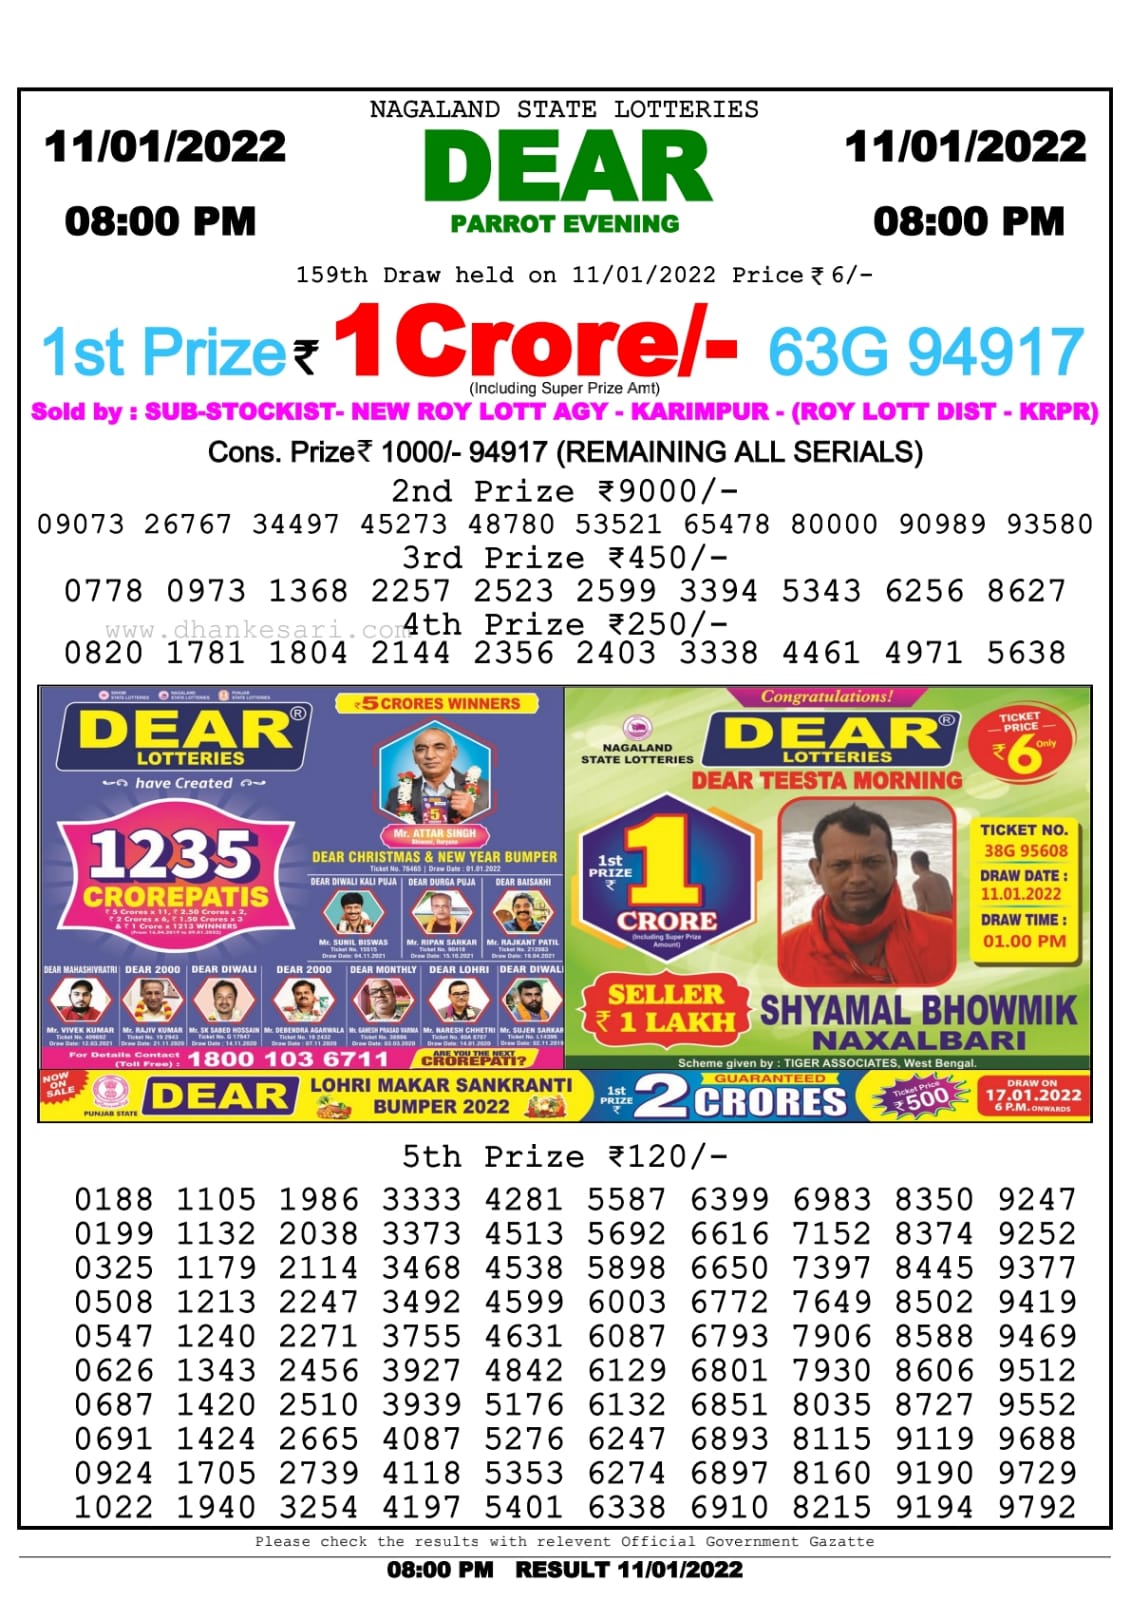 Dear Lottery Nagaland state Lottery Results 8.00 PM 11/01/2022